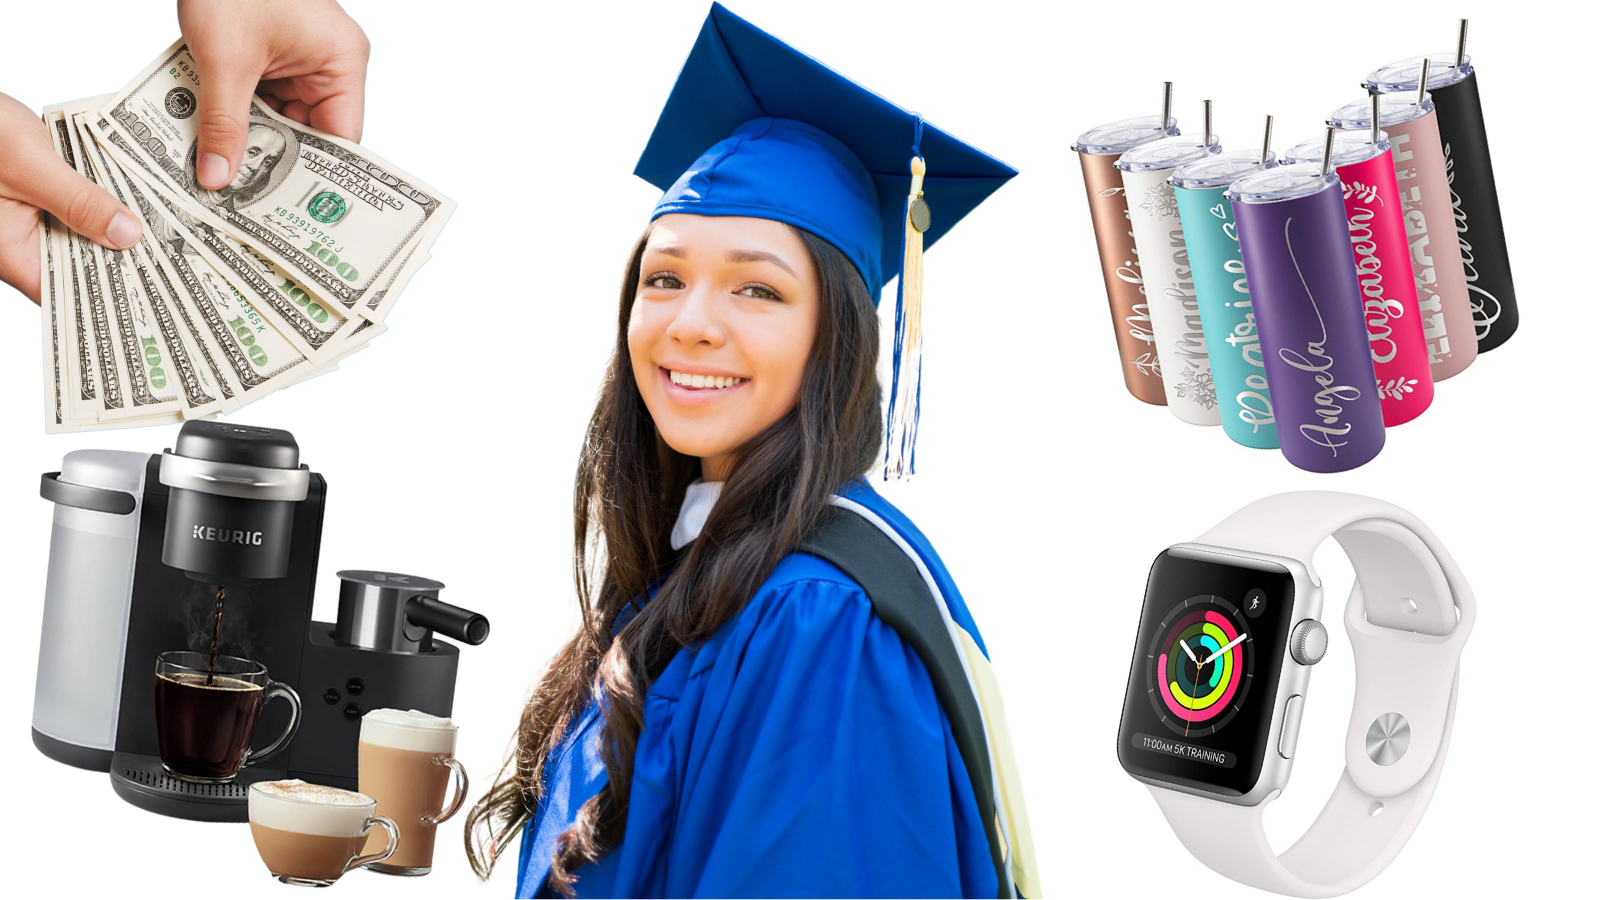 25 Best Gifts For College Graduates 2022